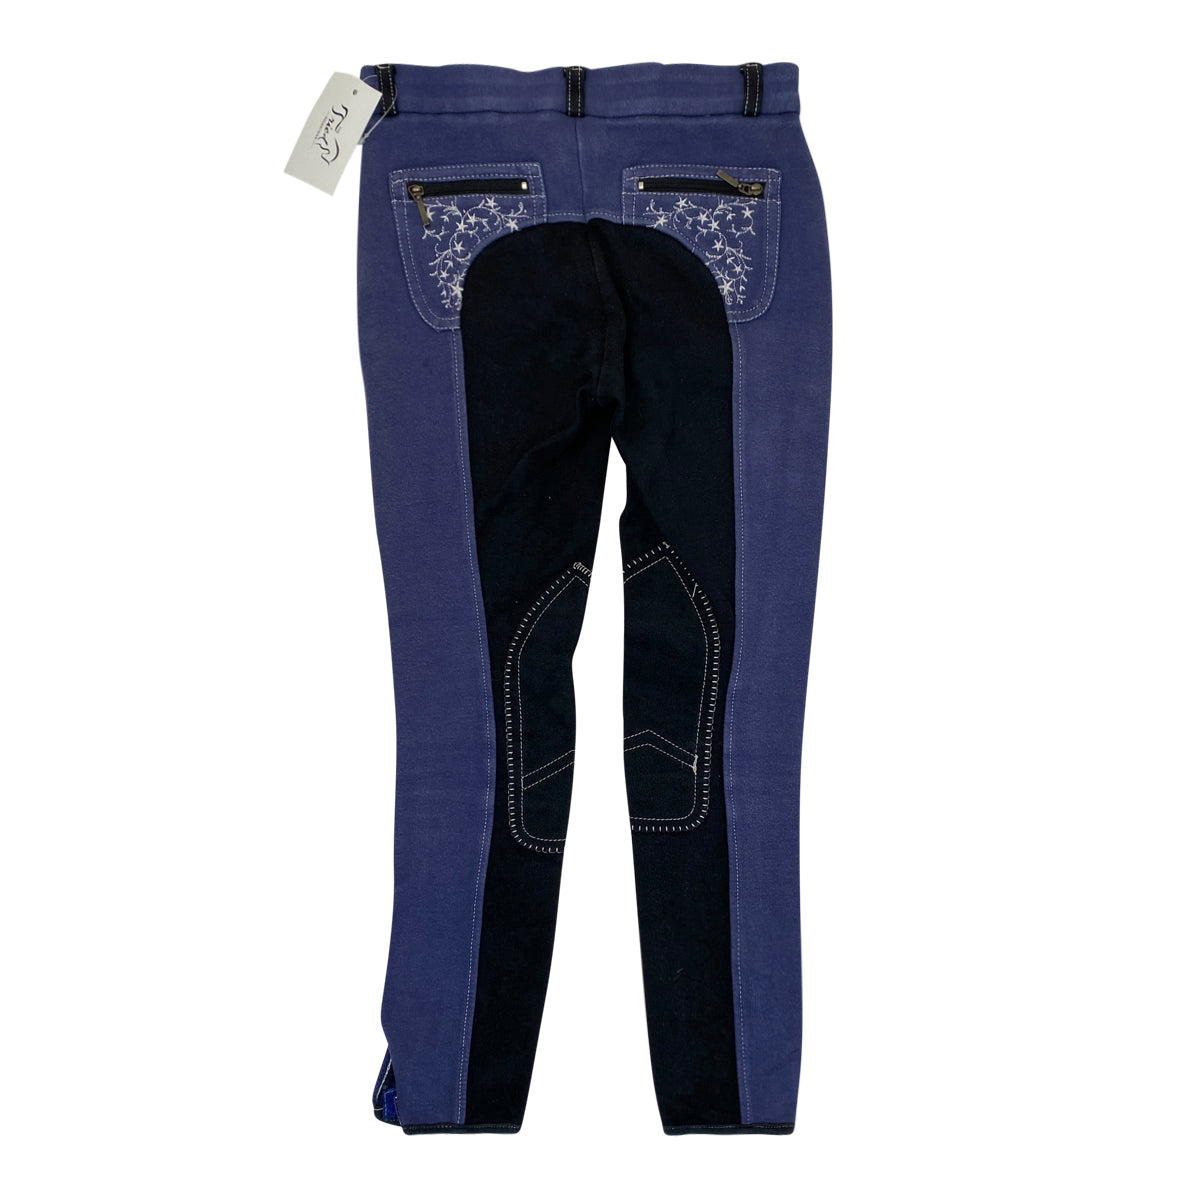 USG Knee Patch Contrast Breeches in Purple/Black